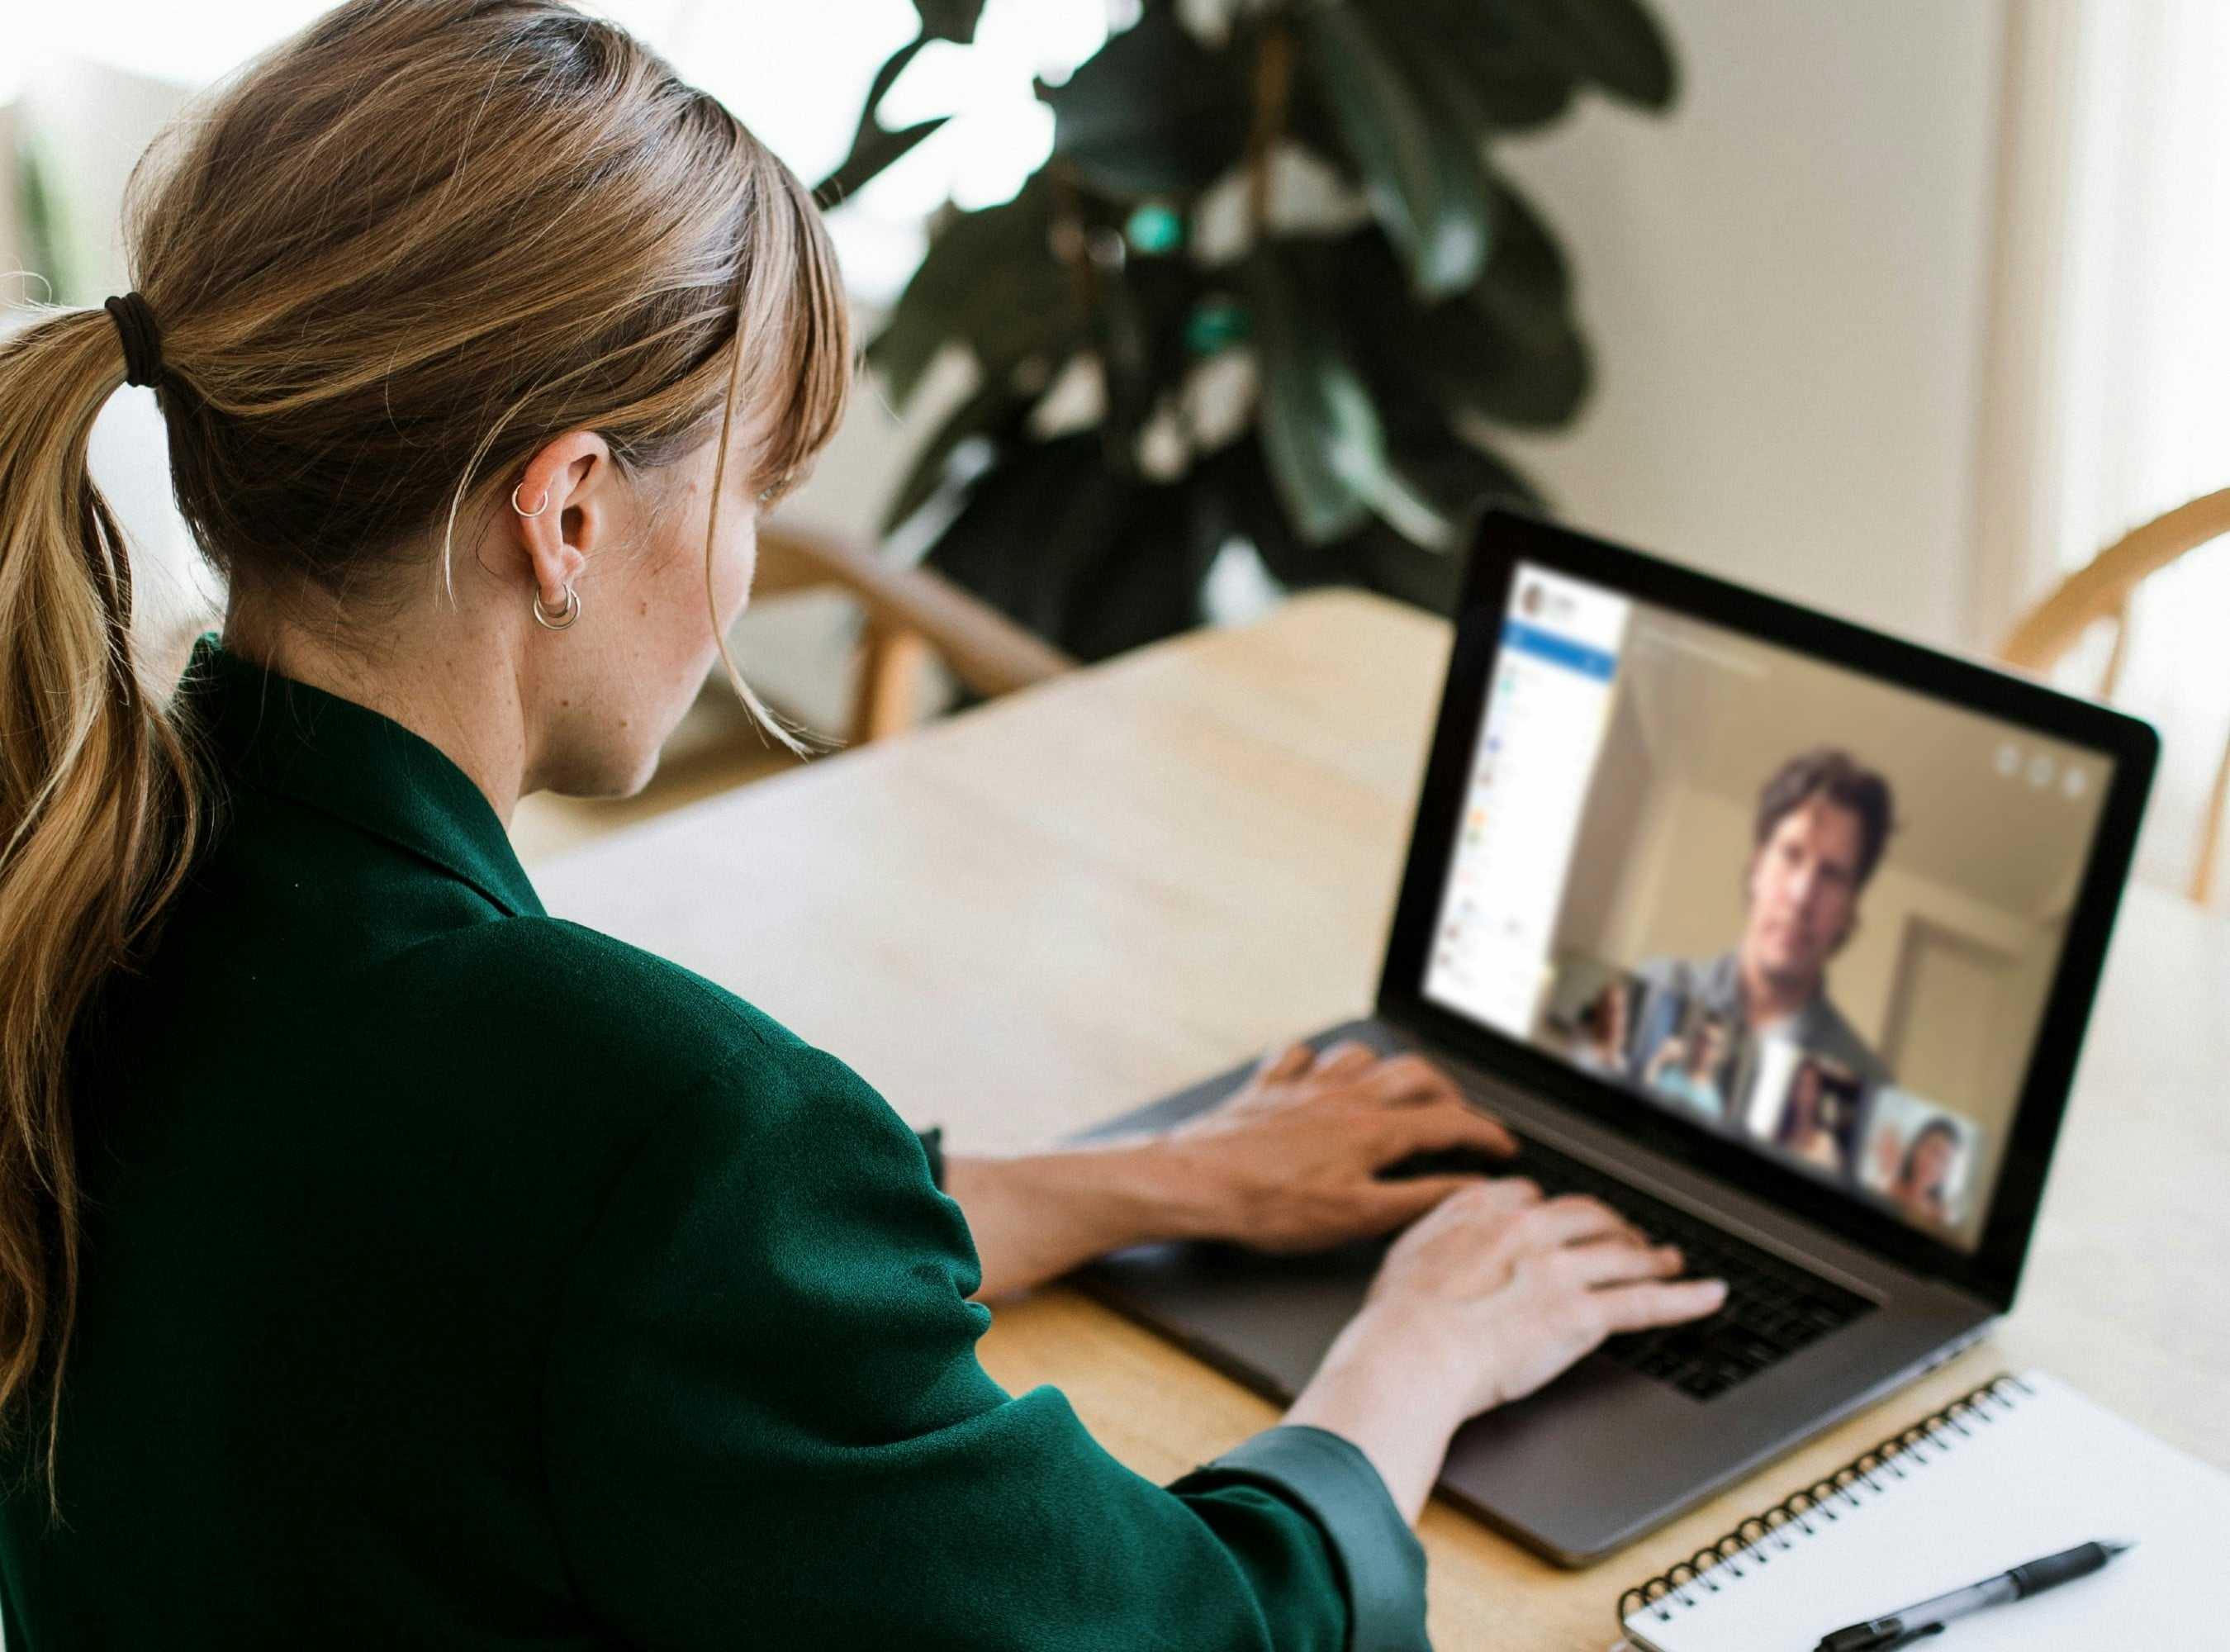 Working with Experts Remotely: Tips, Tech, and Best Practices